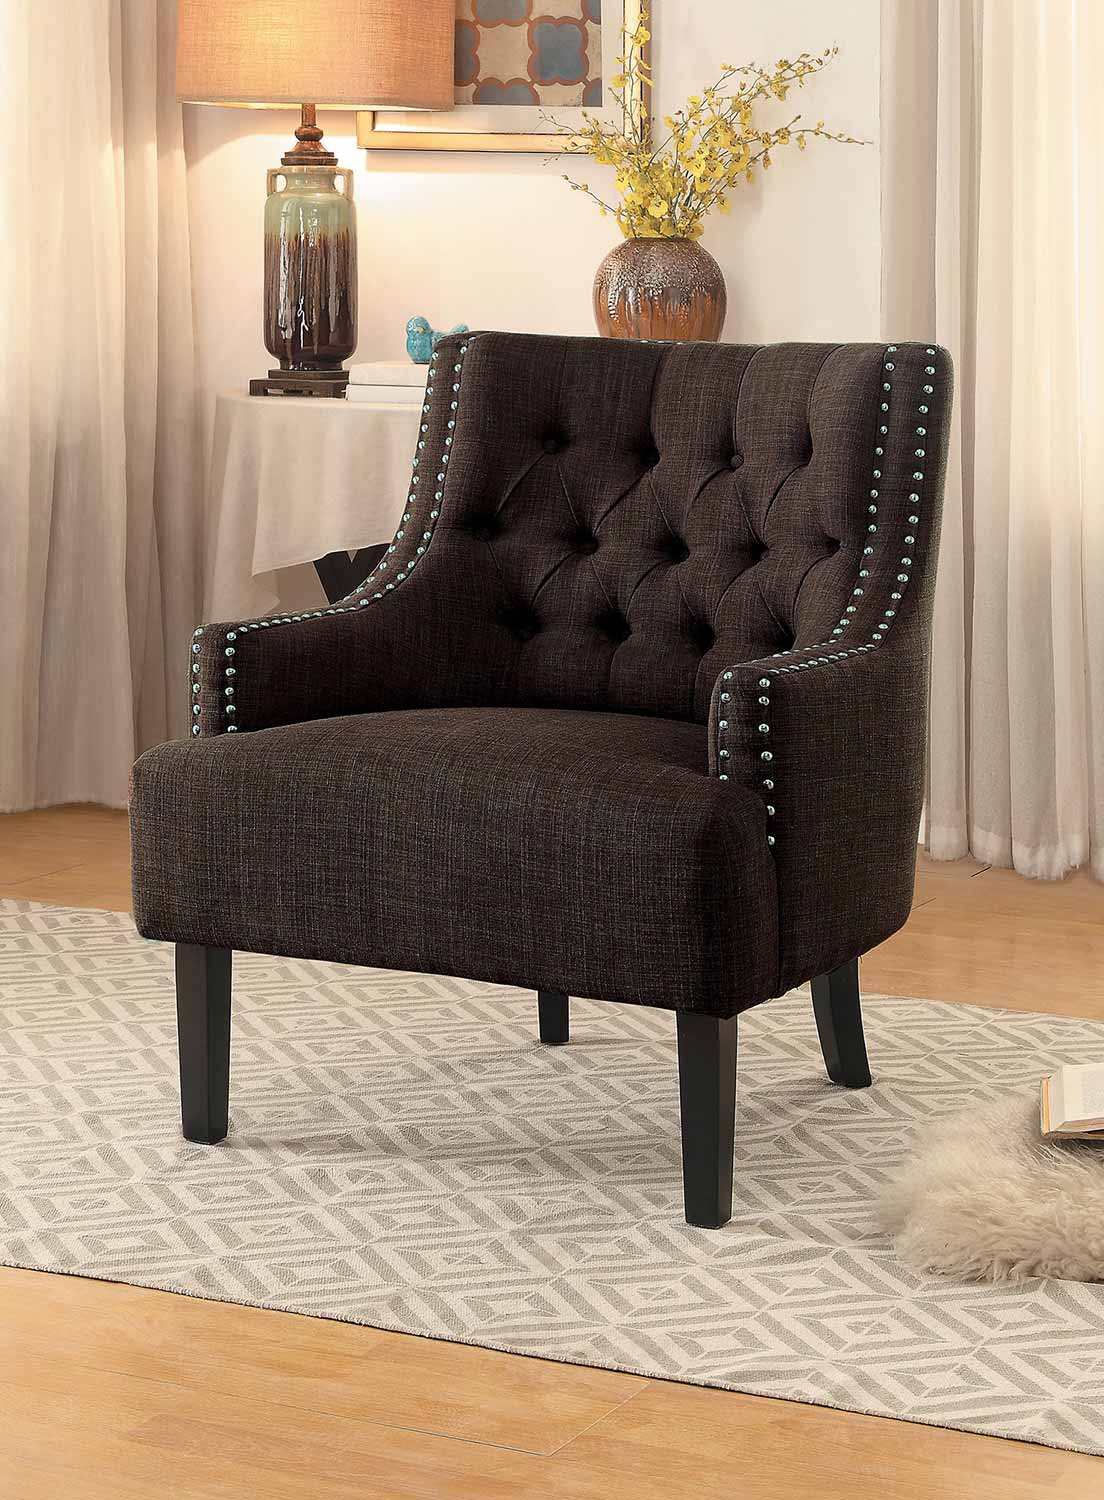 Homelegance Charisma Accent Chair - Chocolate